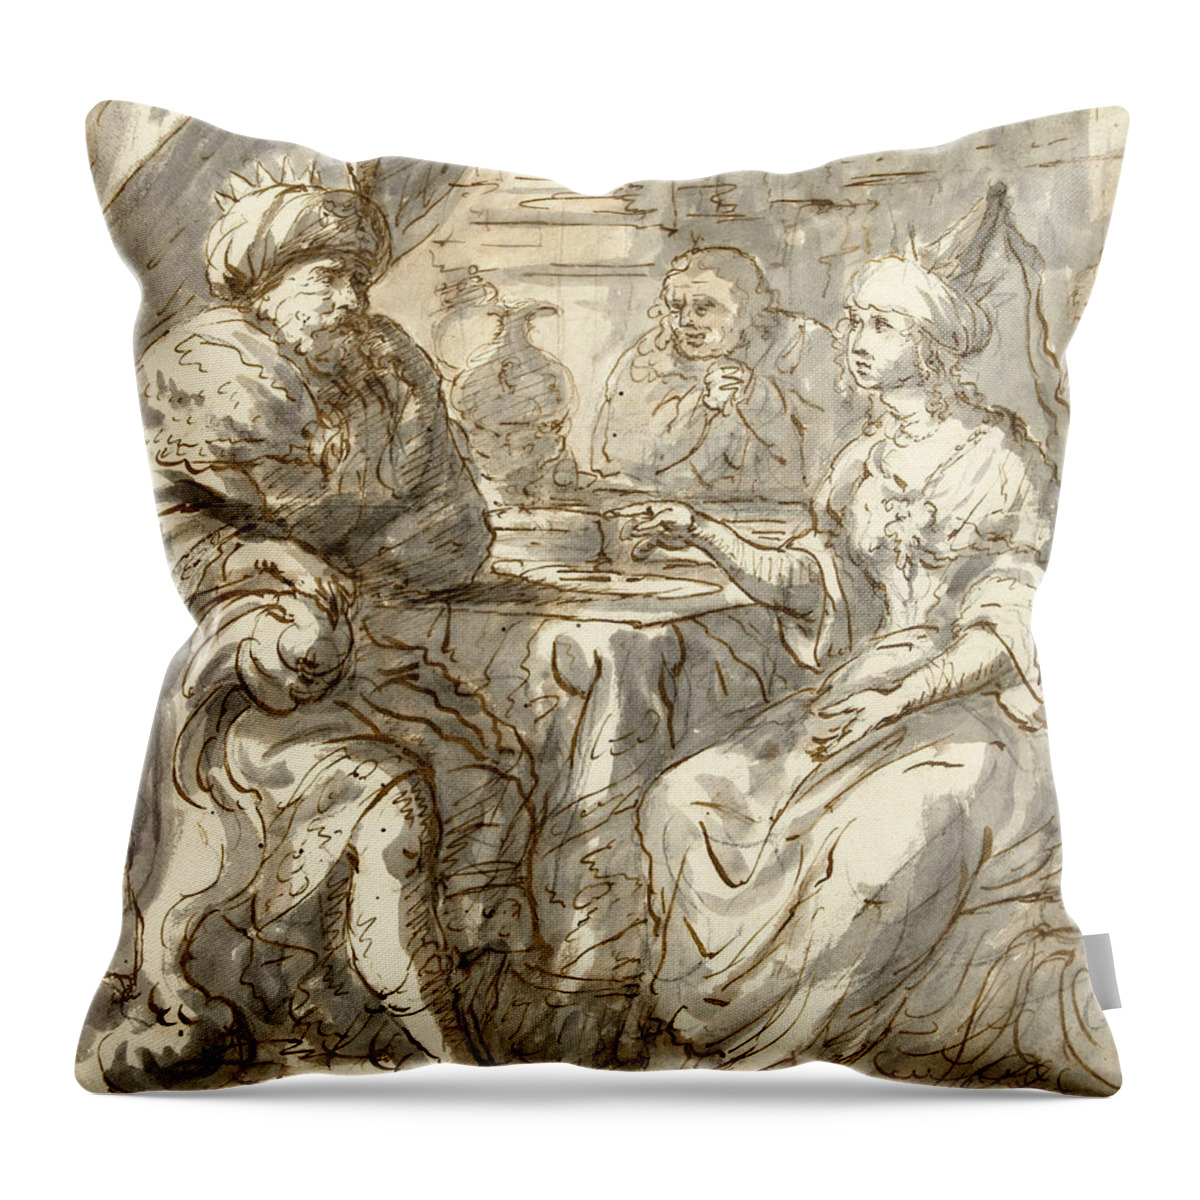 Zacharias Blijhooft Throw Pillow featuring the drawing Esther's Banquet by Zacharias Blijhooft